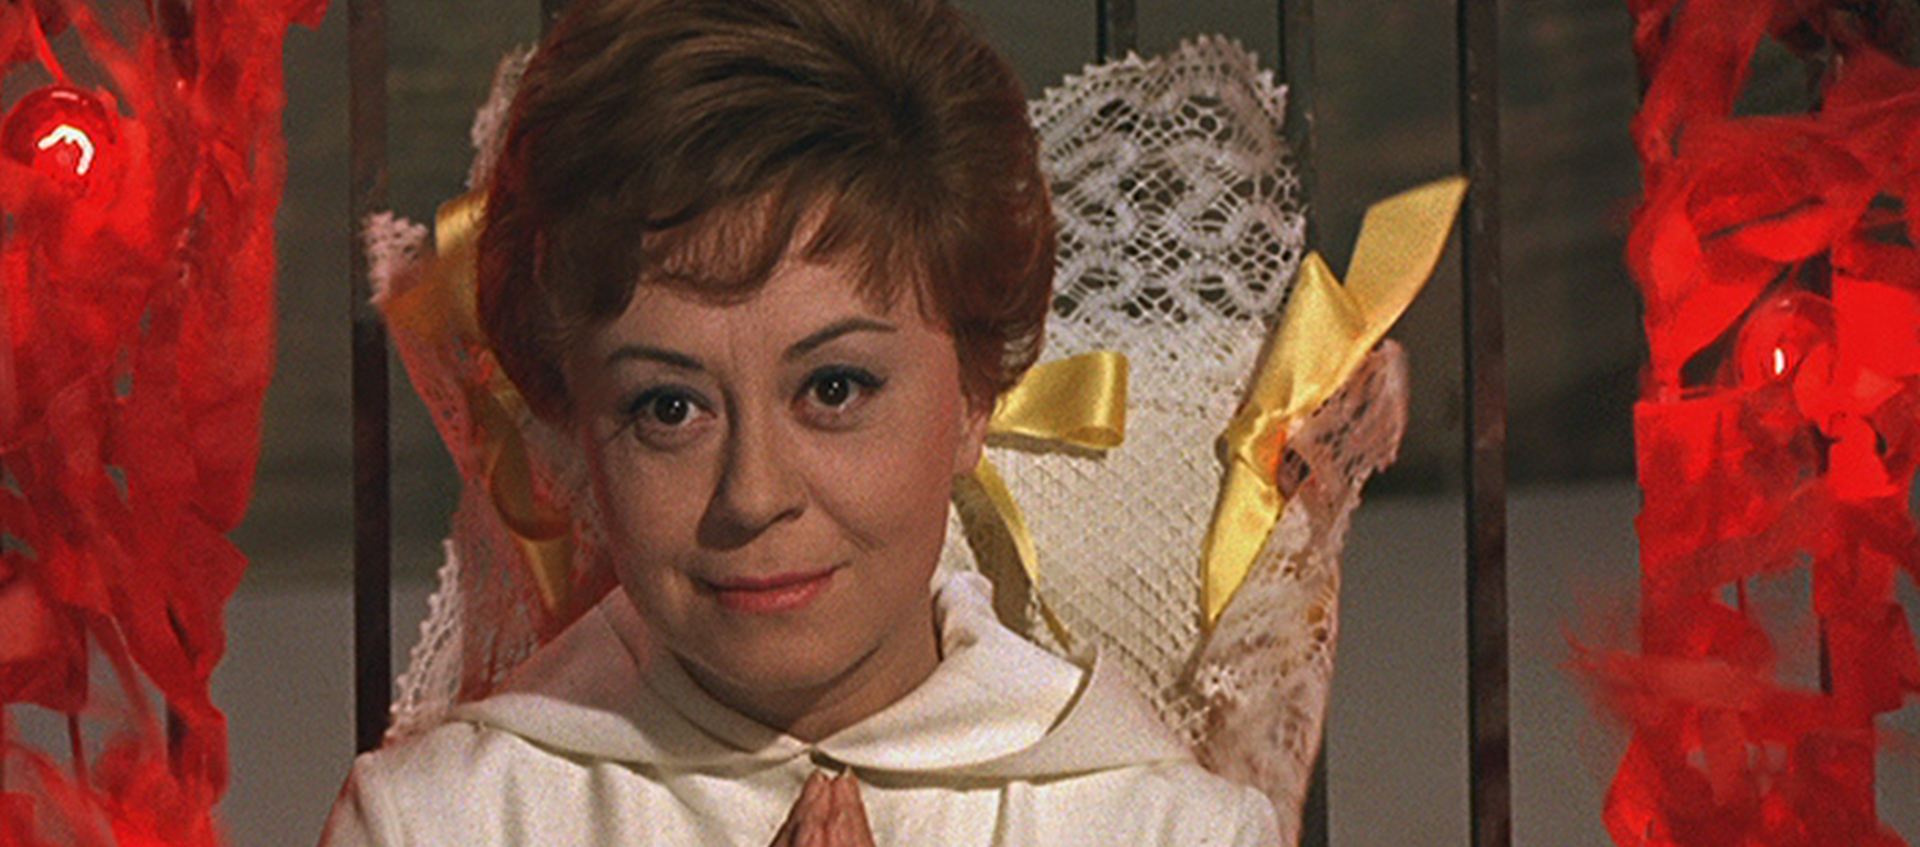 Still of Giulietta (Giulietta Masina), who has short, light brown hair and is wearing a white blouse. Her hands are pressed together at her chest as if in prayer, and there are streams of red fire climbing up the metal-barred fence on either side of her and a doily with yellow ribbons against the fence behind her.